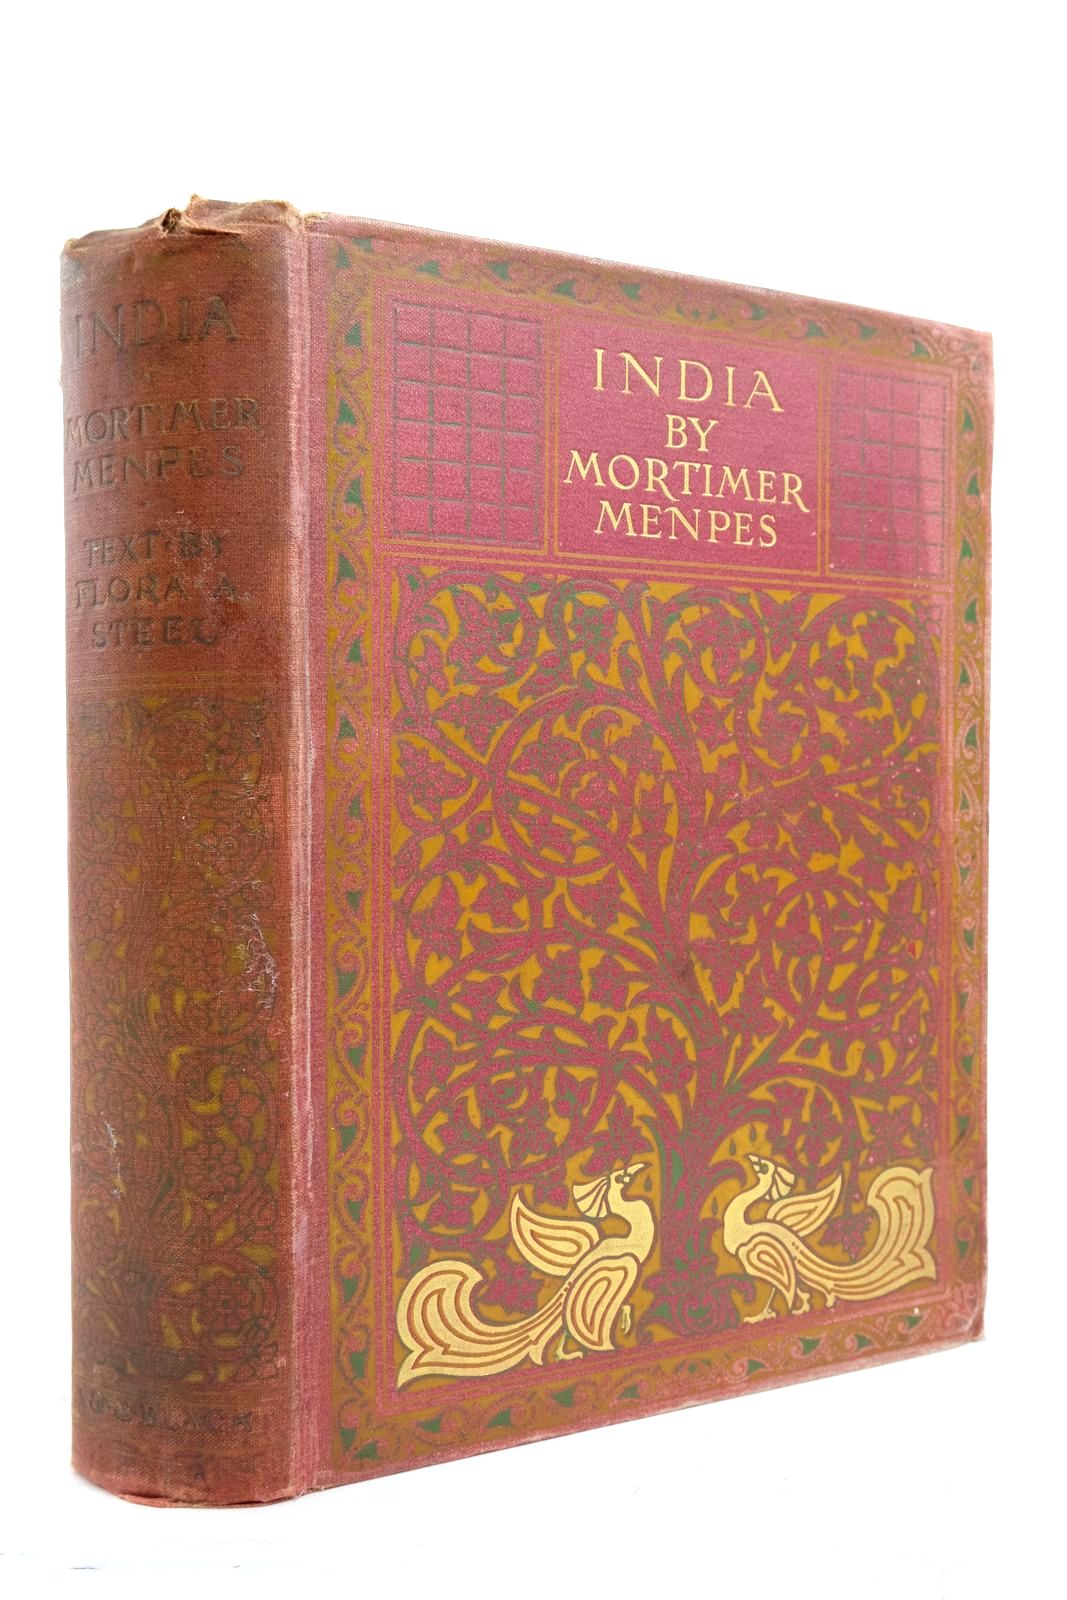 Photo of INDIA written by Steel, Flora Annie illustrated by Menpes, Mortimer published by Adam & Charles Black (STOCK CODE: 2137082)  for sale by Stella & Rose's Books